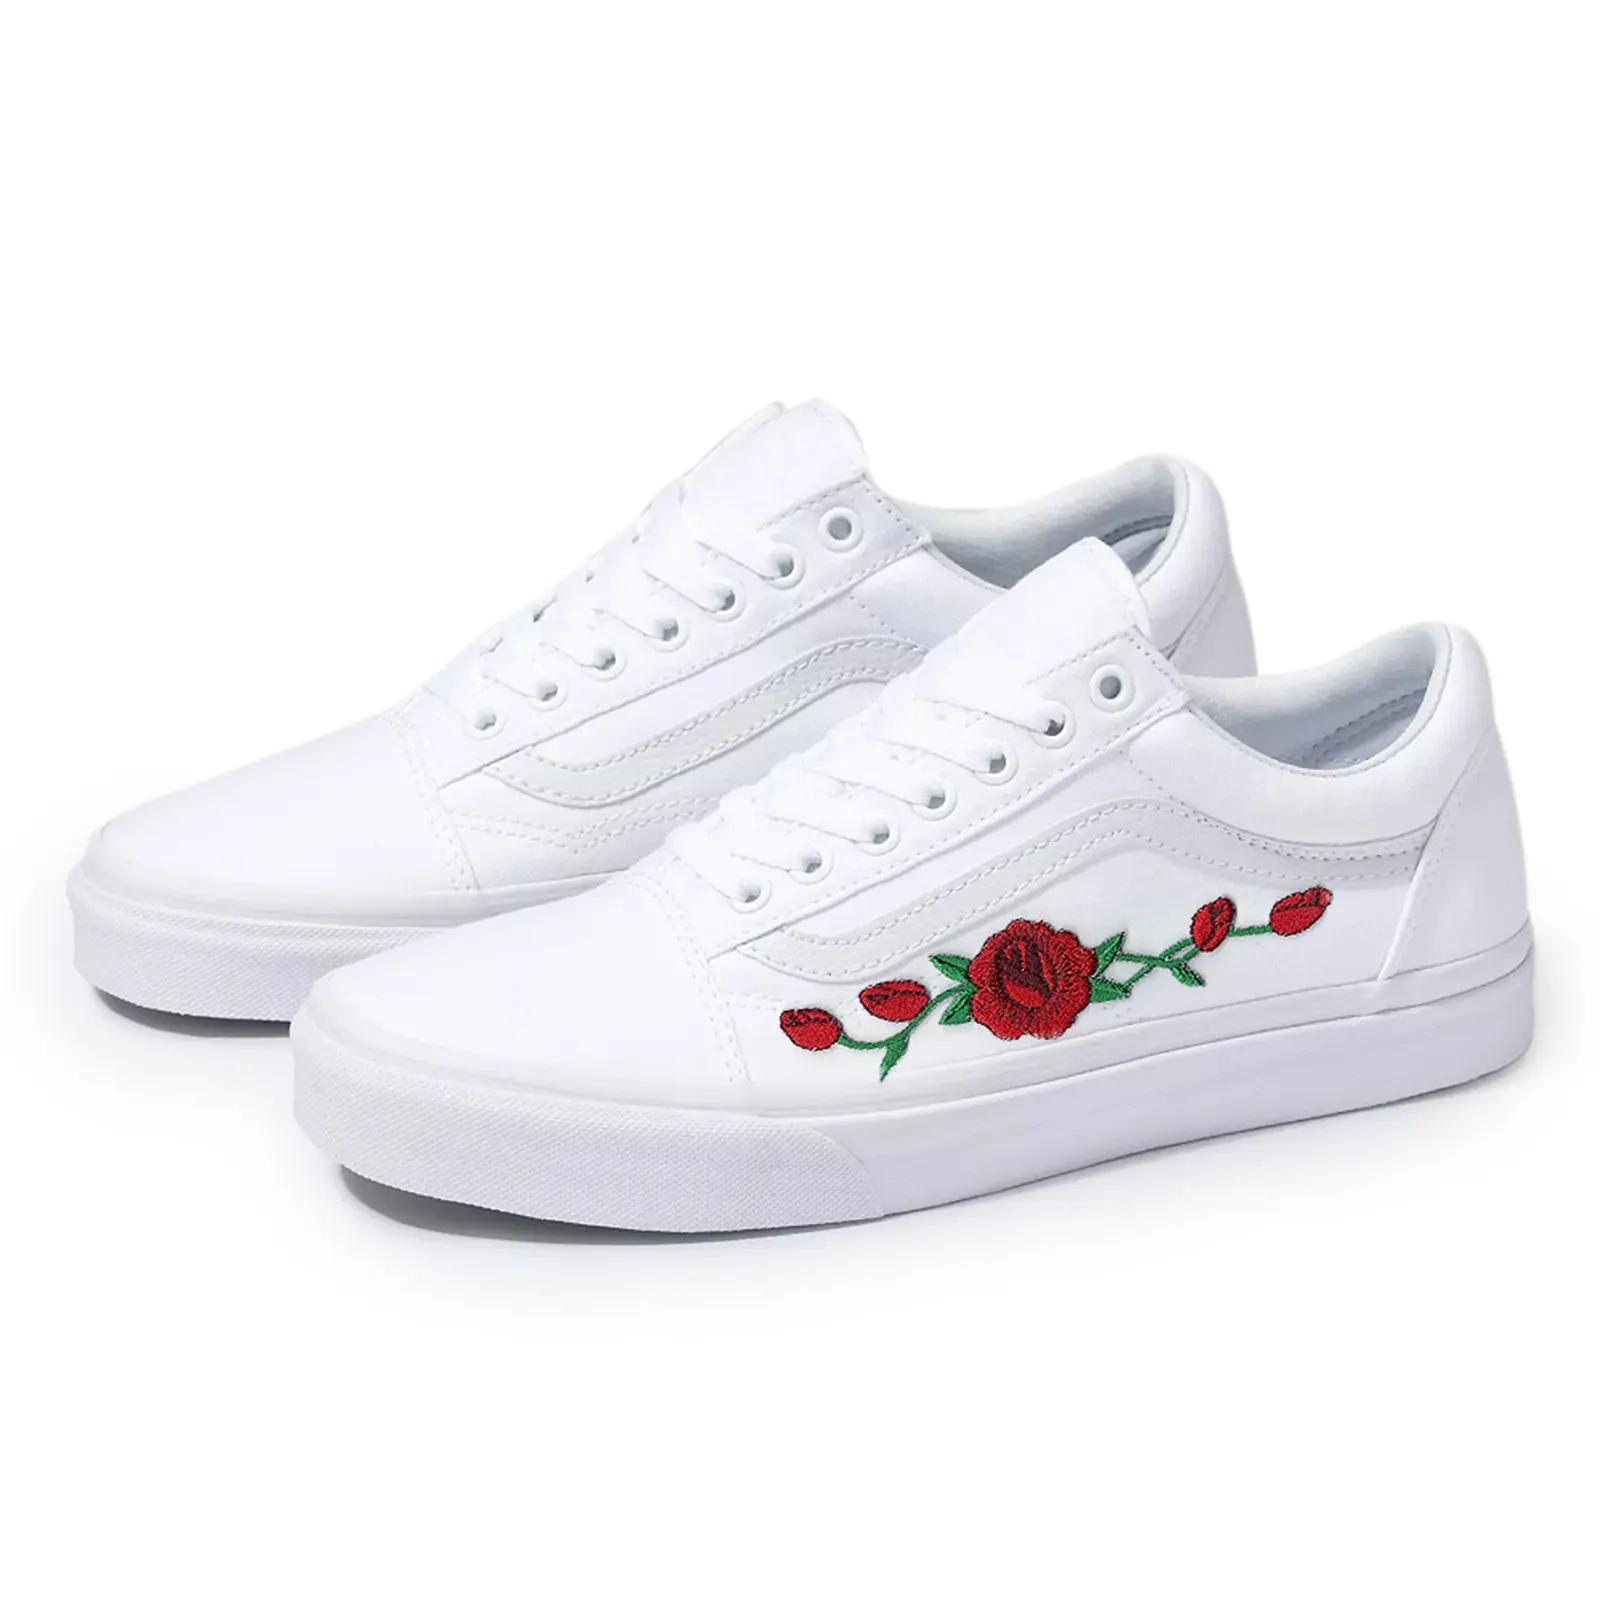 red rose shoes